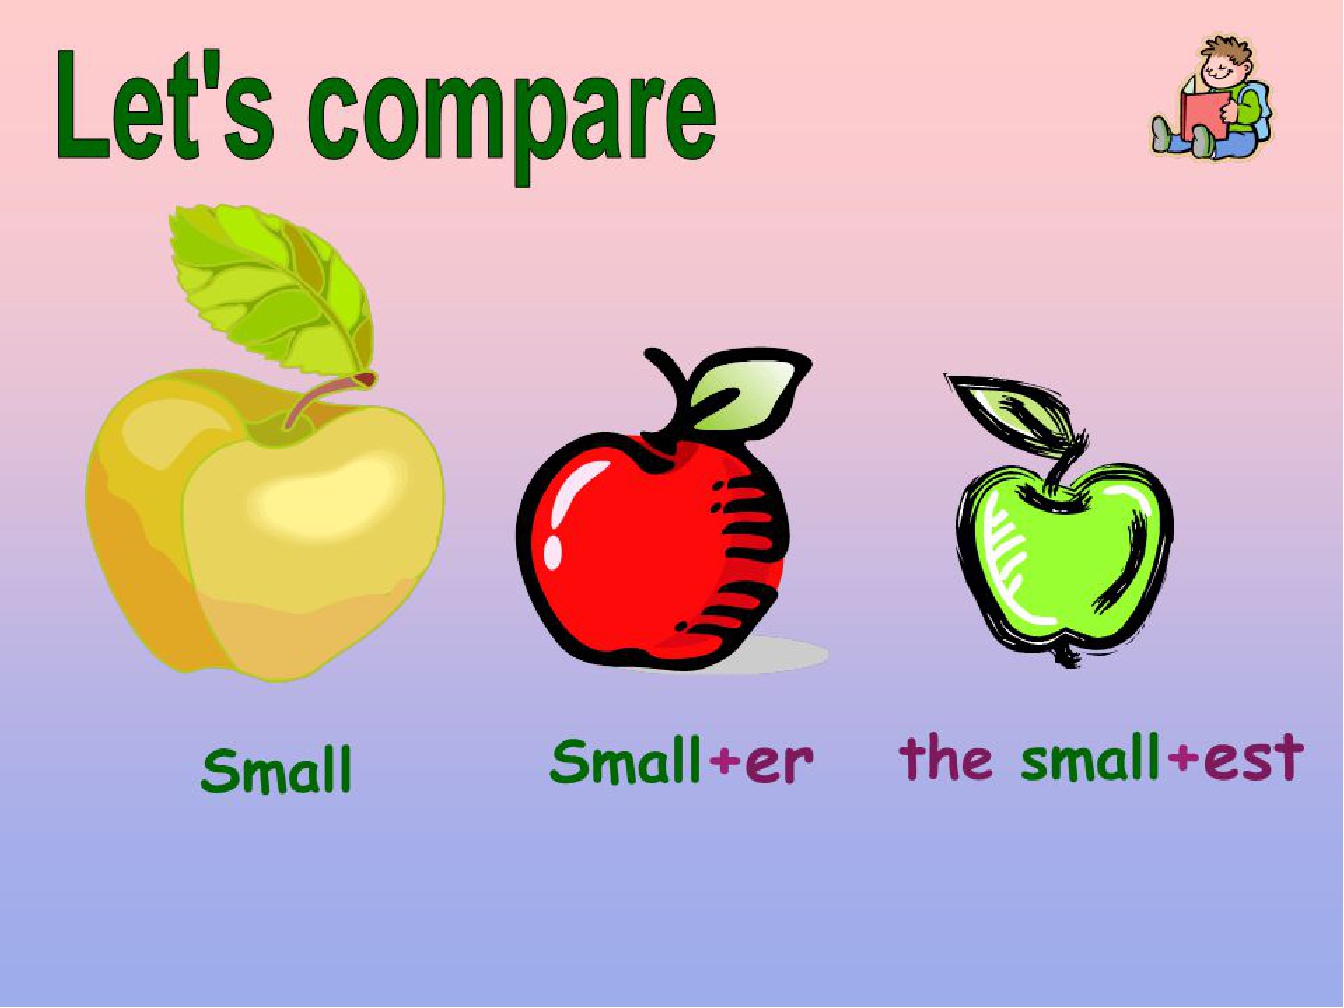 Comparative er. Degrees of Comparison of adjectives. Comparison of adjectives. Comparison картинка. Degrees of Comparison картинки.